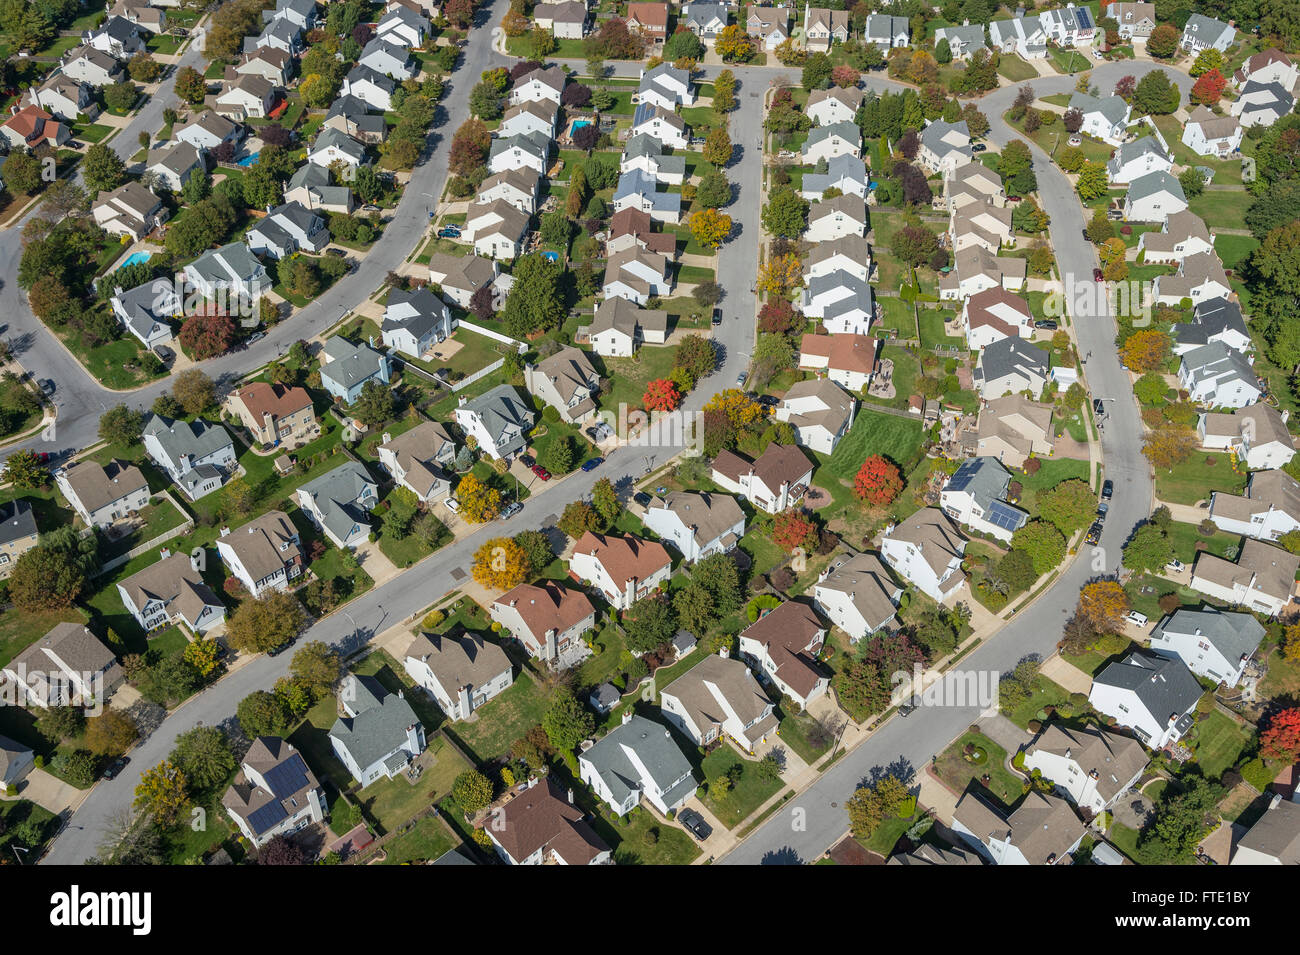 Aerial View Of Residential Houses In Suburban Neighborhood, New Jersey, USA  Stock Photo - Alamy